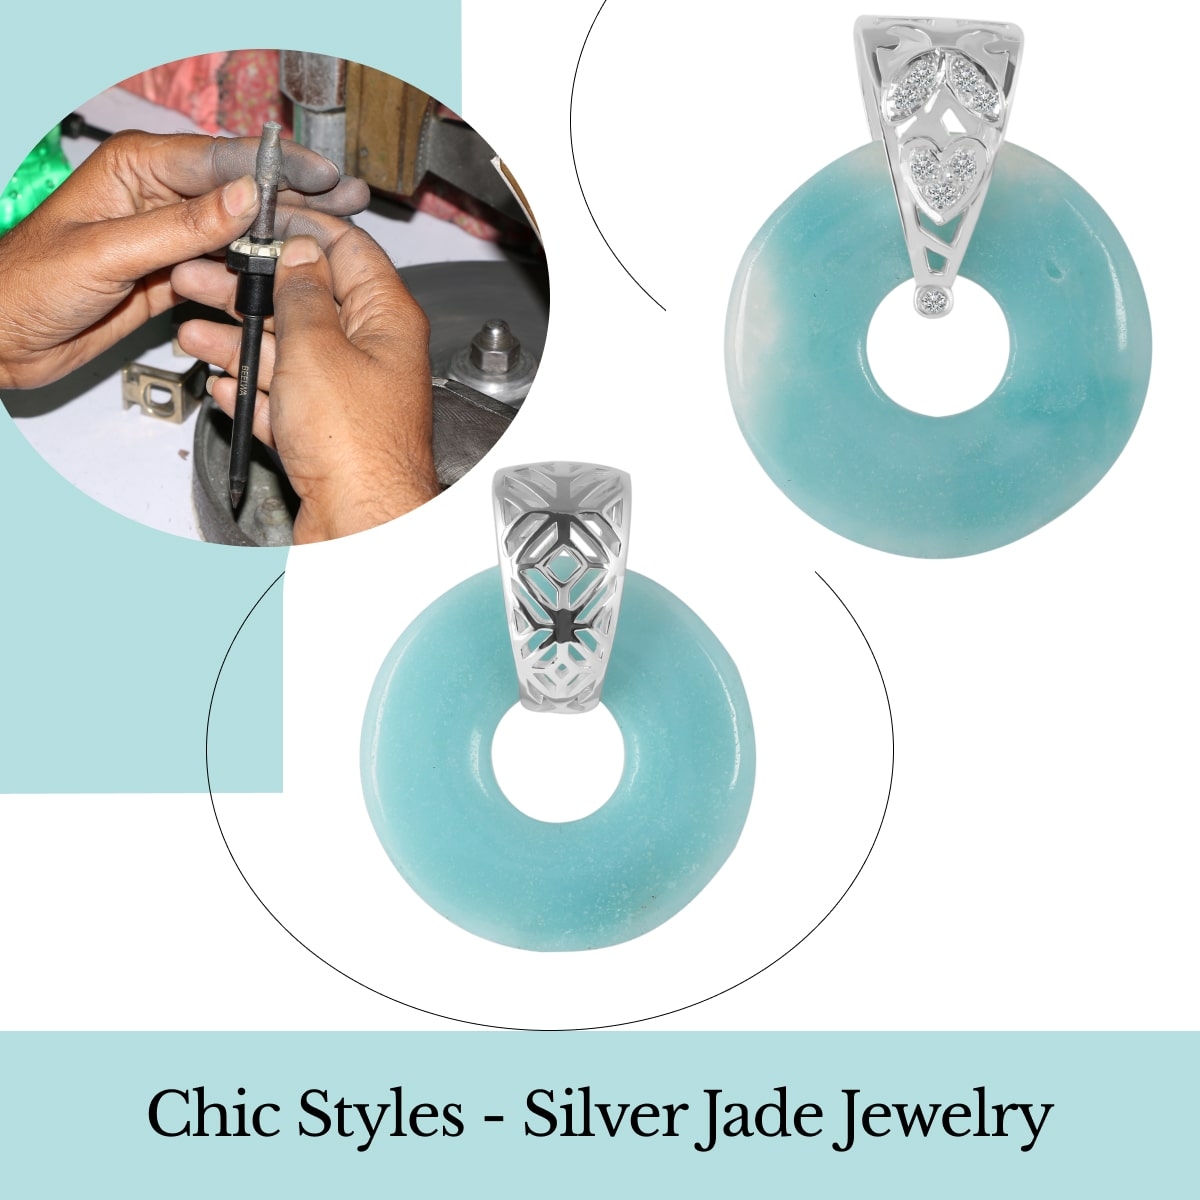 Sterling Silver and Plain Silver Jade Jewelry